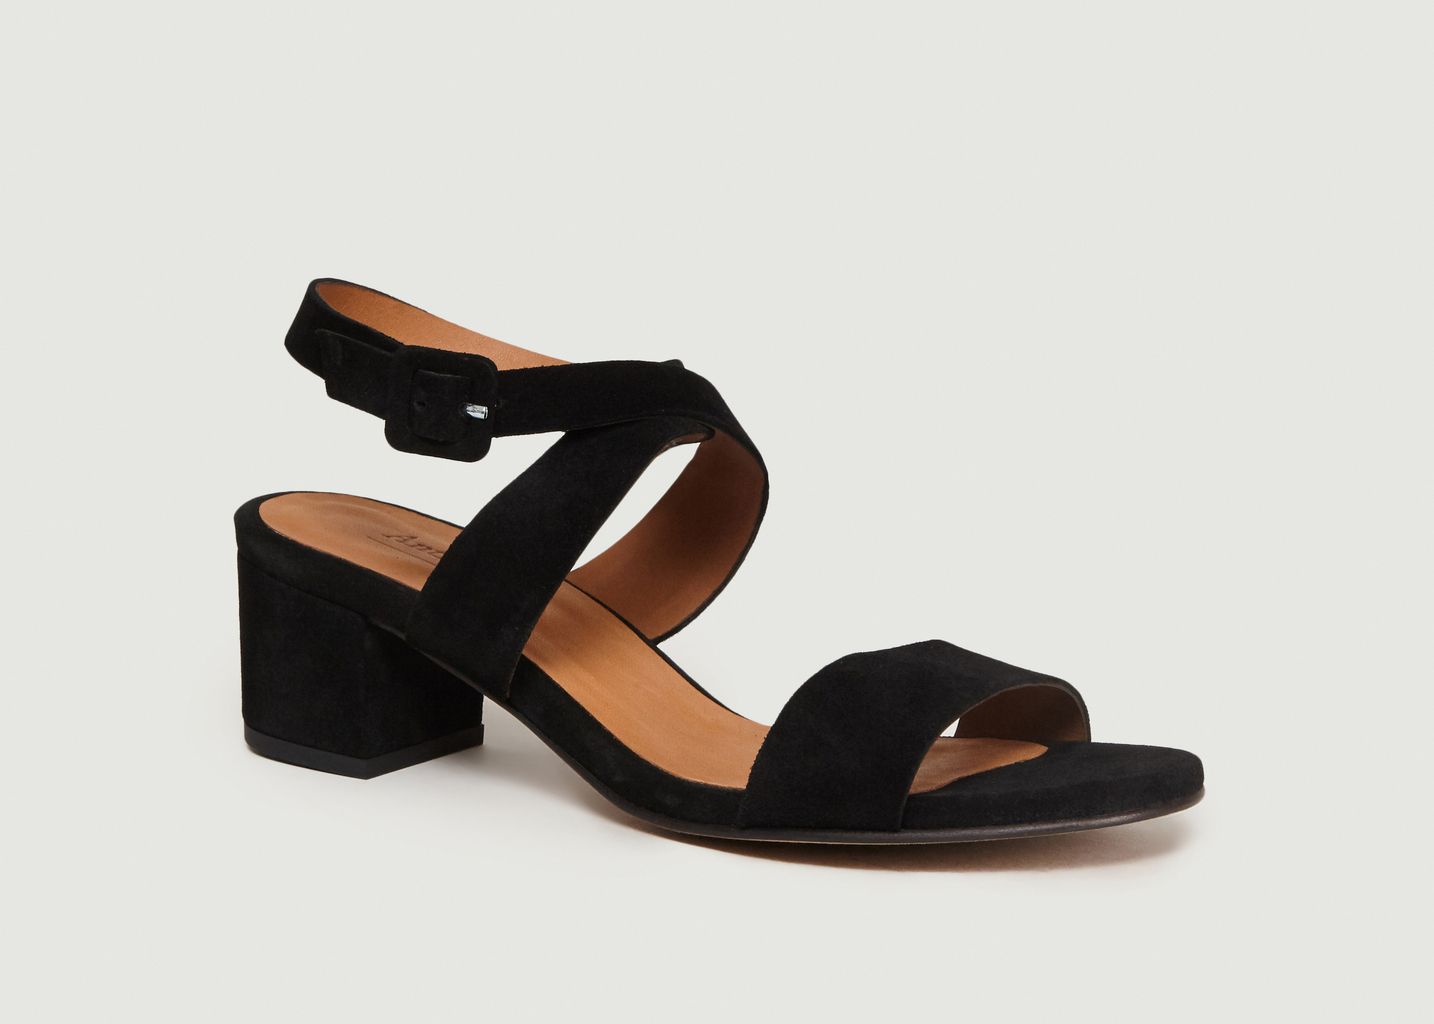 Parisian Black Sandals With Heels - Get Images One